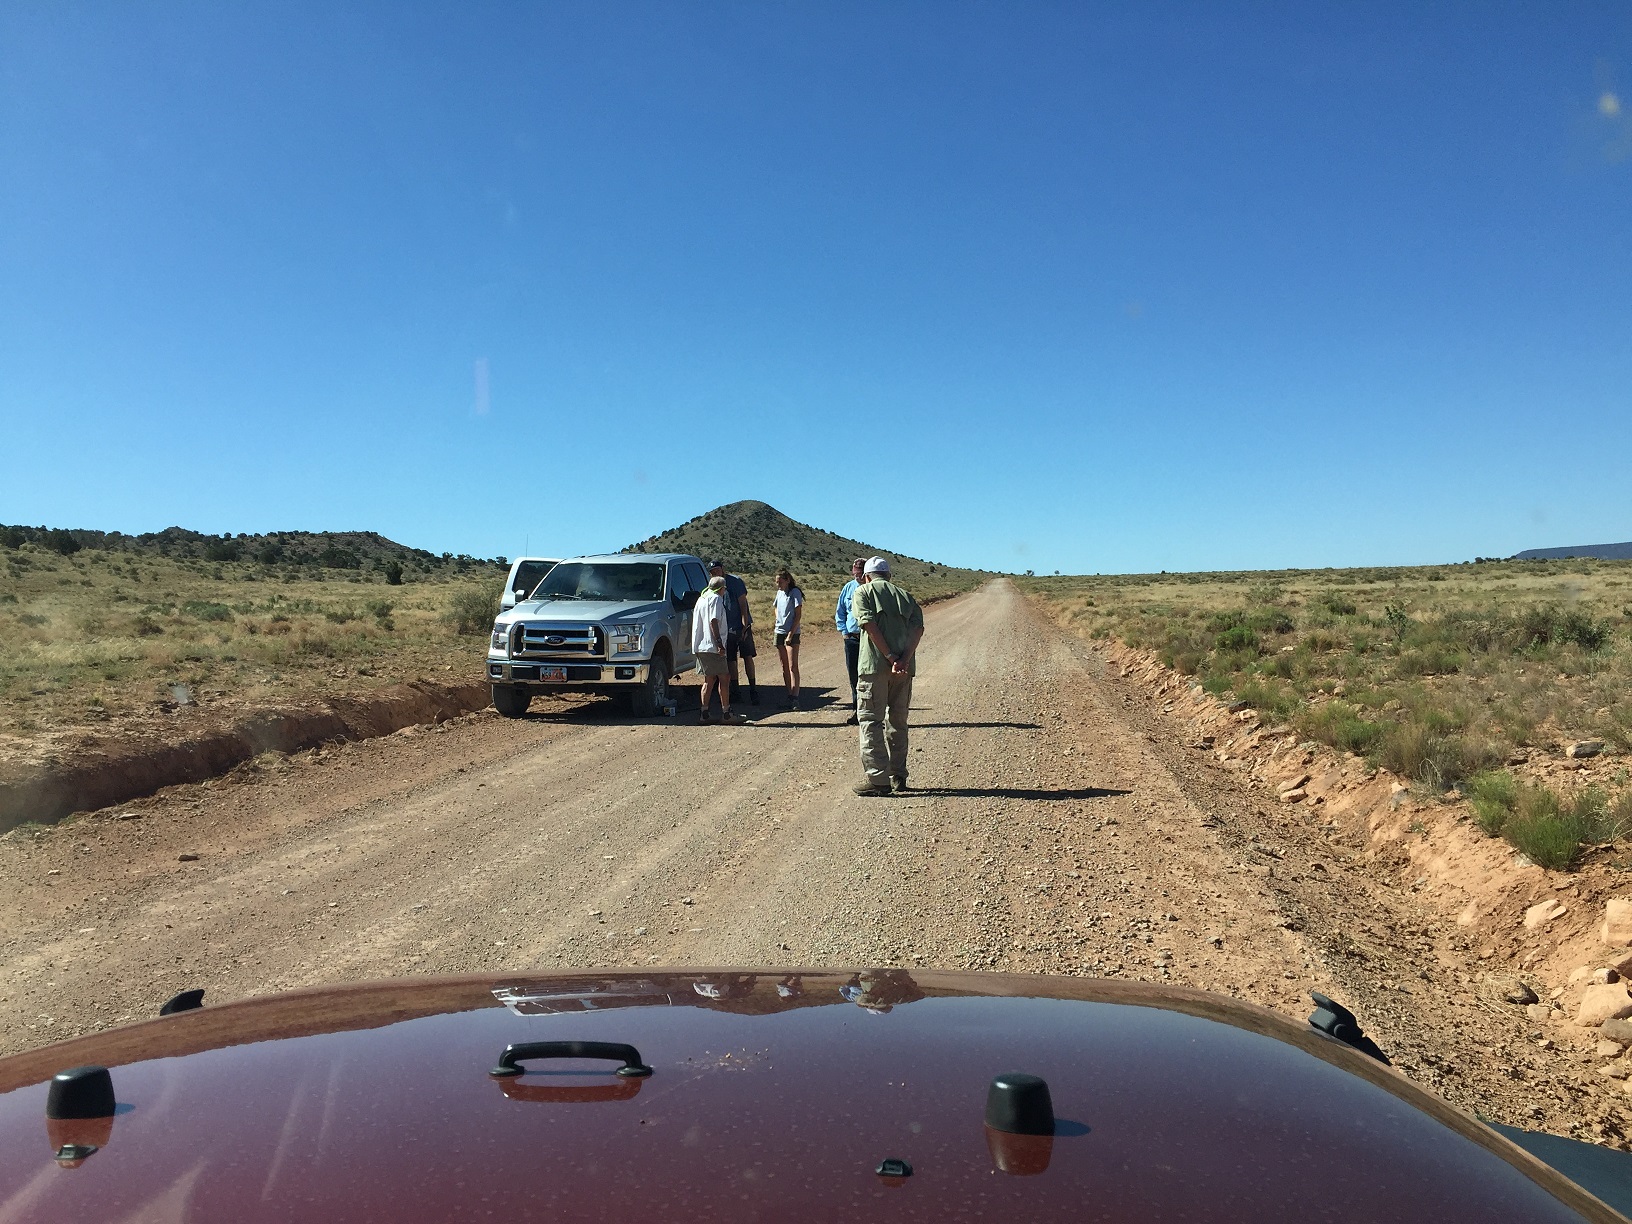 National Park Service vehicle with a flat tire on Mohave County Road 5